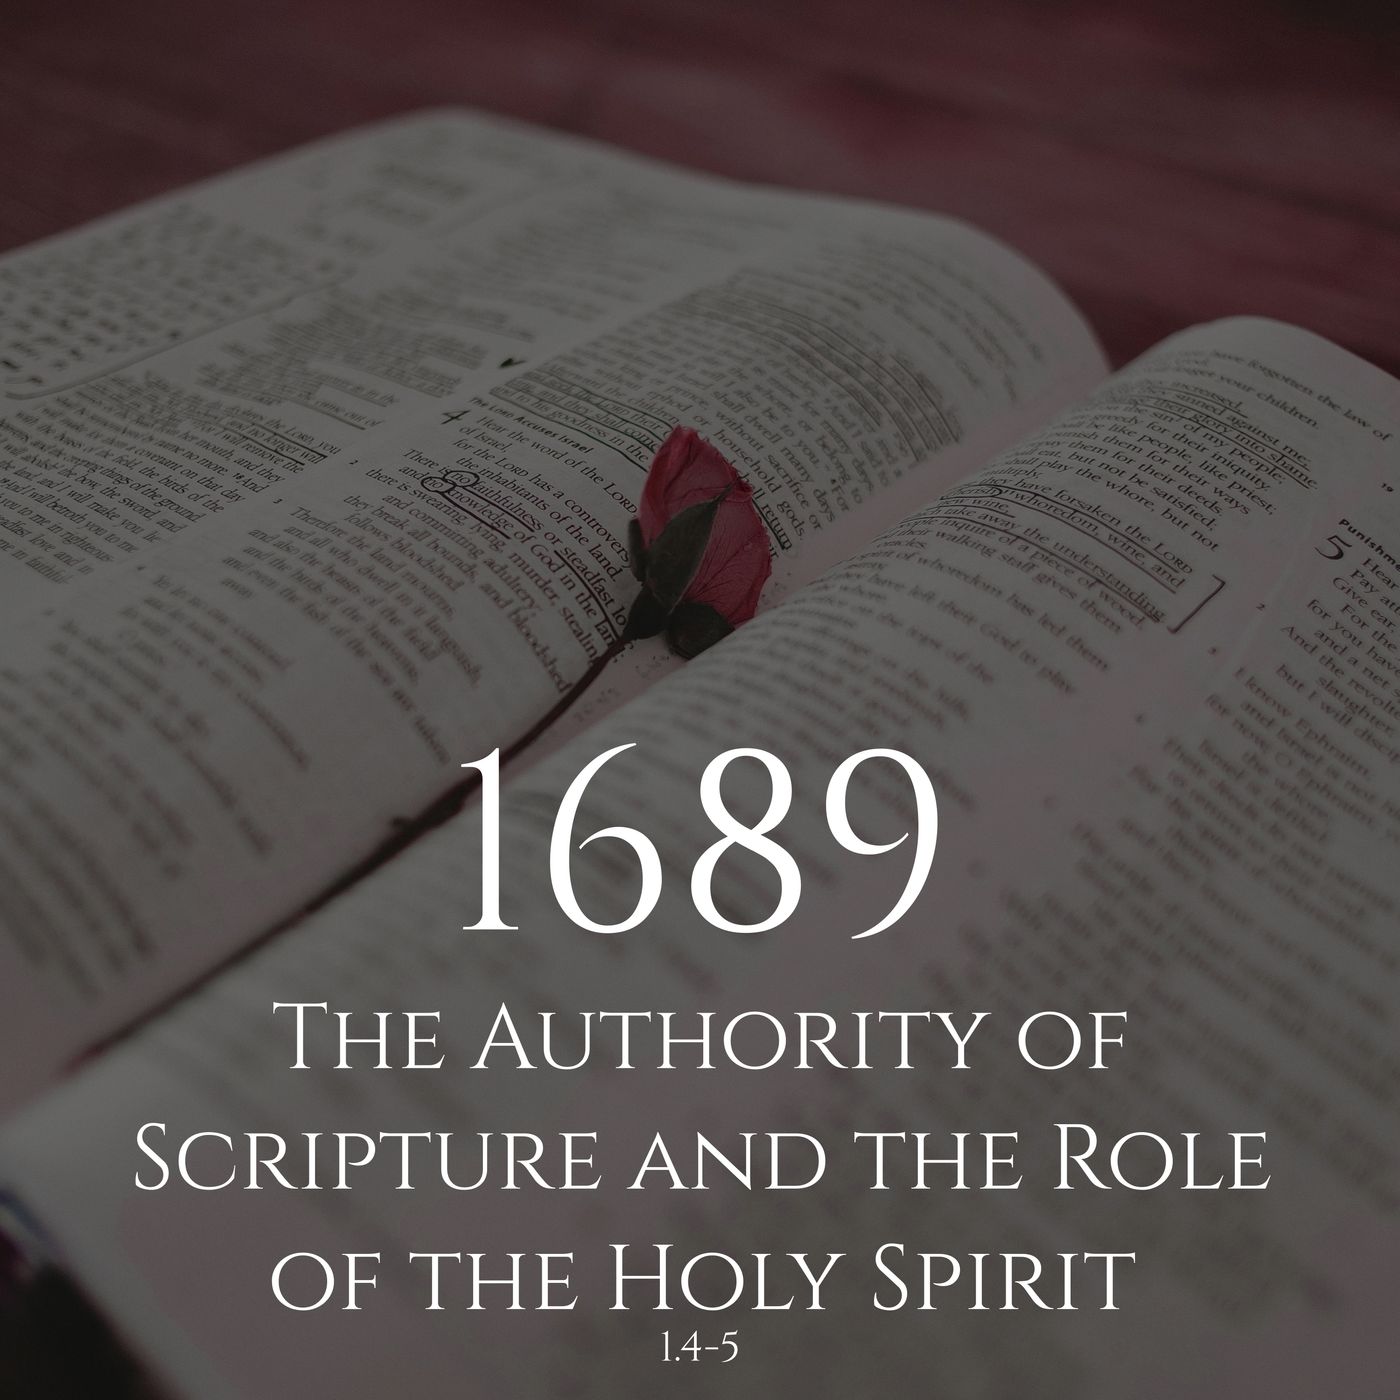 REWIND: Back to Episode 31 on the Authority of Scripture and the Role of the Holy Spirit